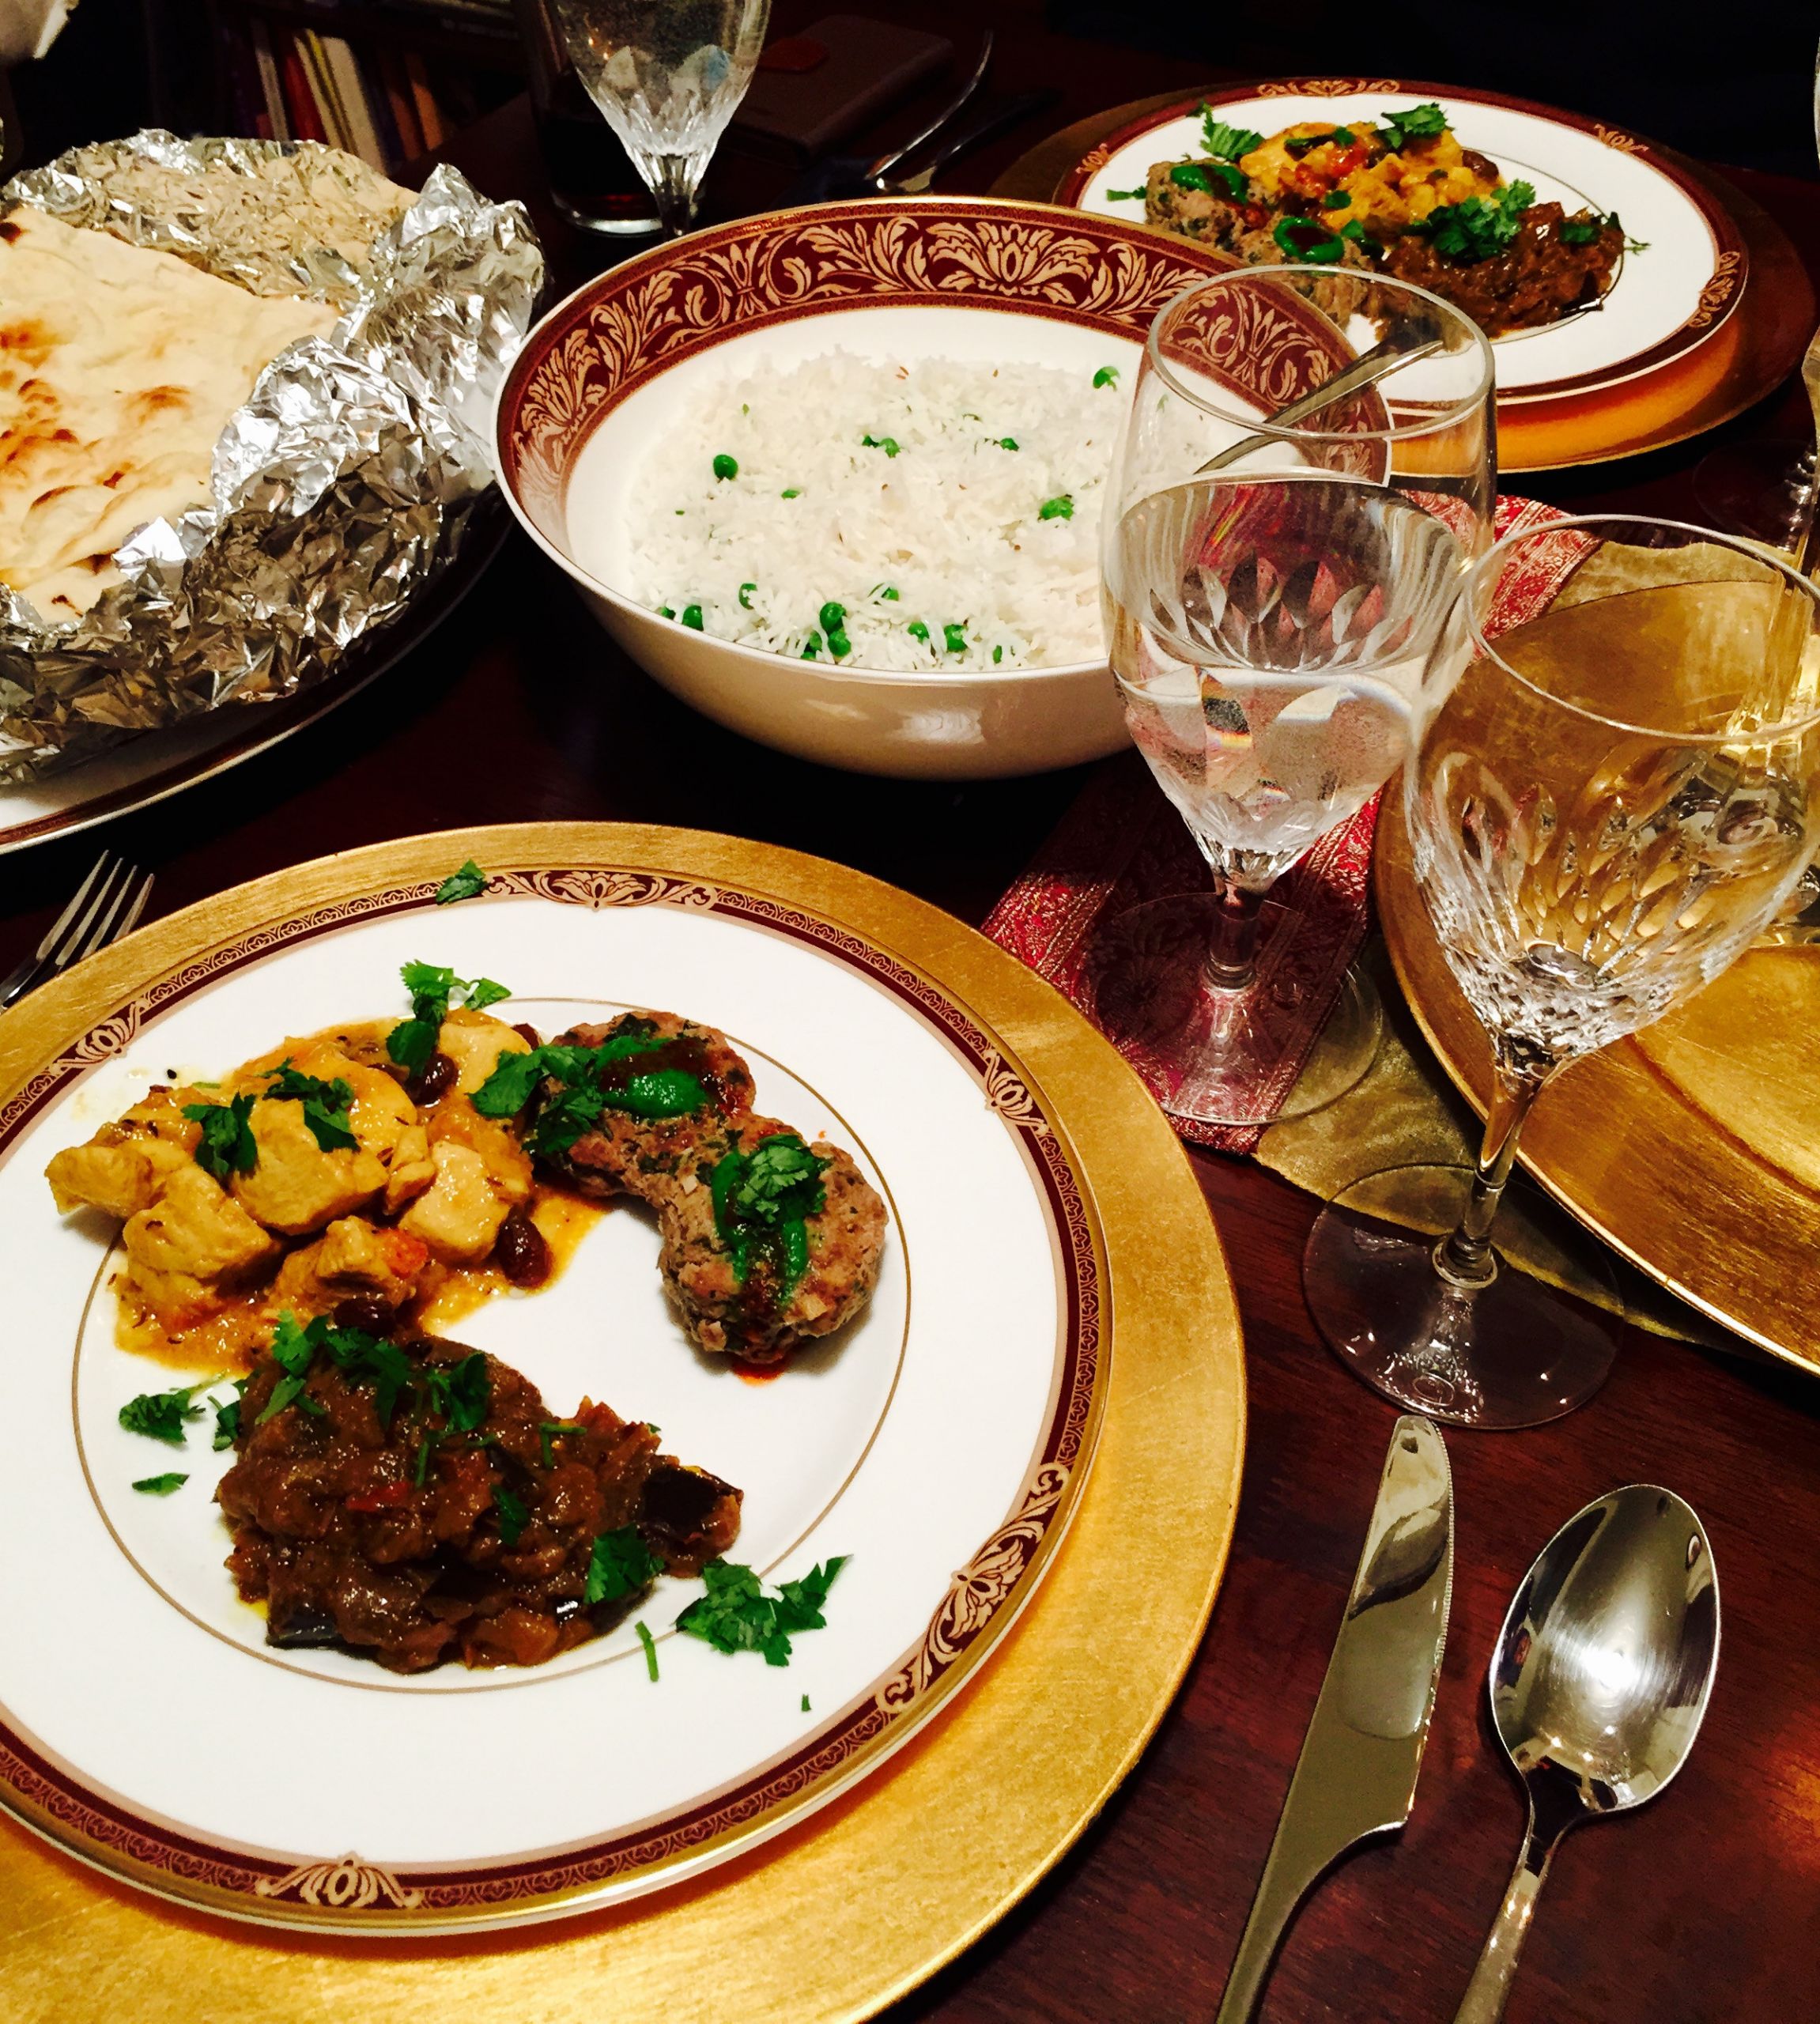 Dinner Party Foods Ideas
 Hosting an Elegant Indian Dinner Party